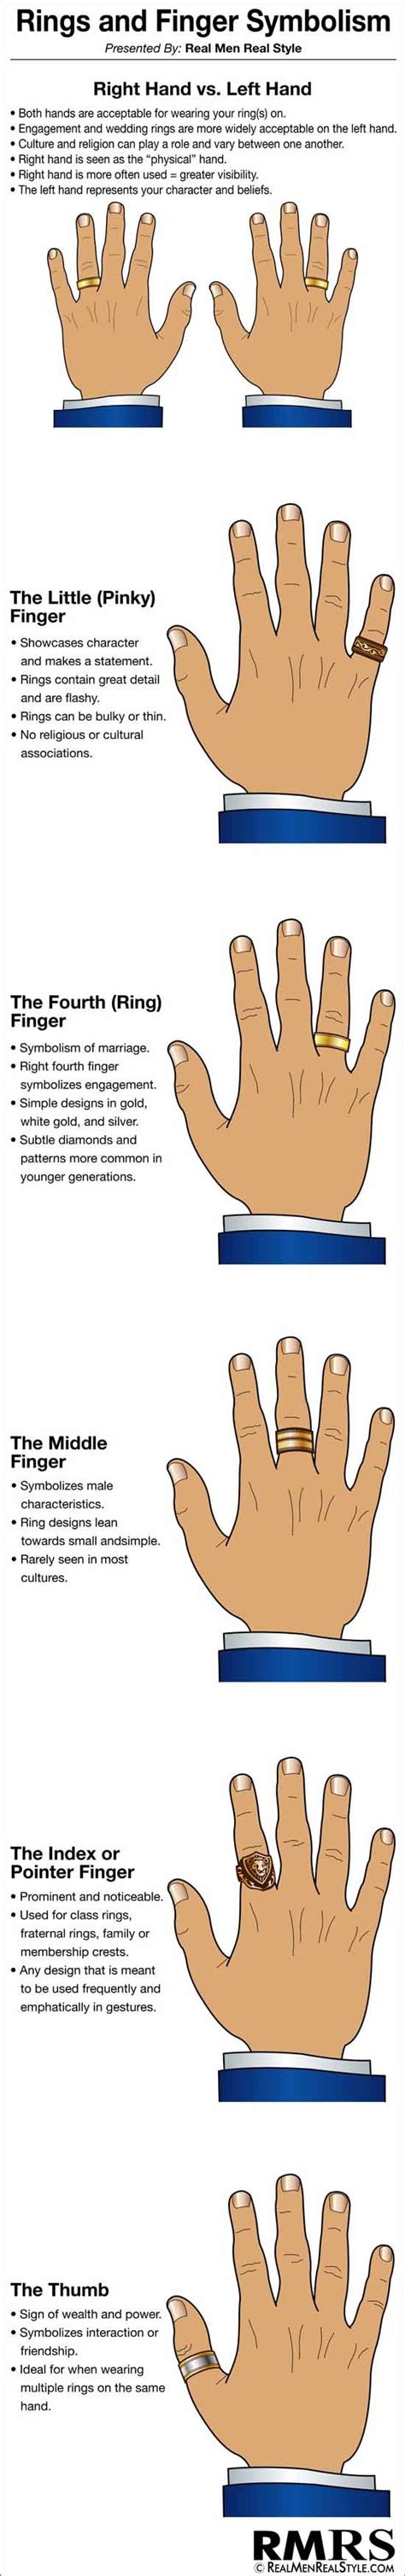 Ring Finger And Symbolism Infographic — Steemit